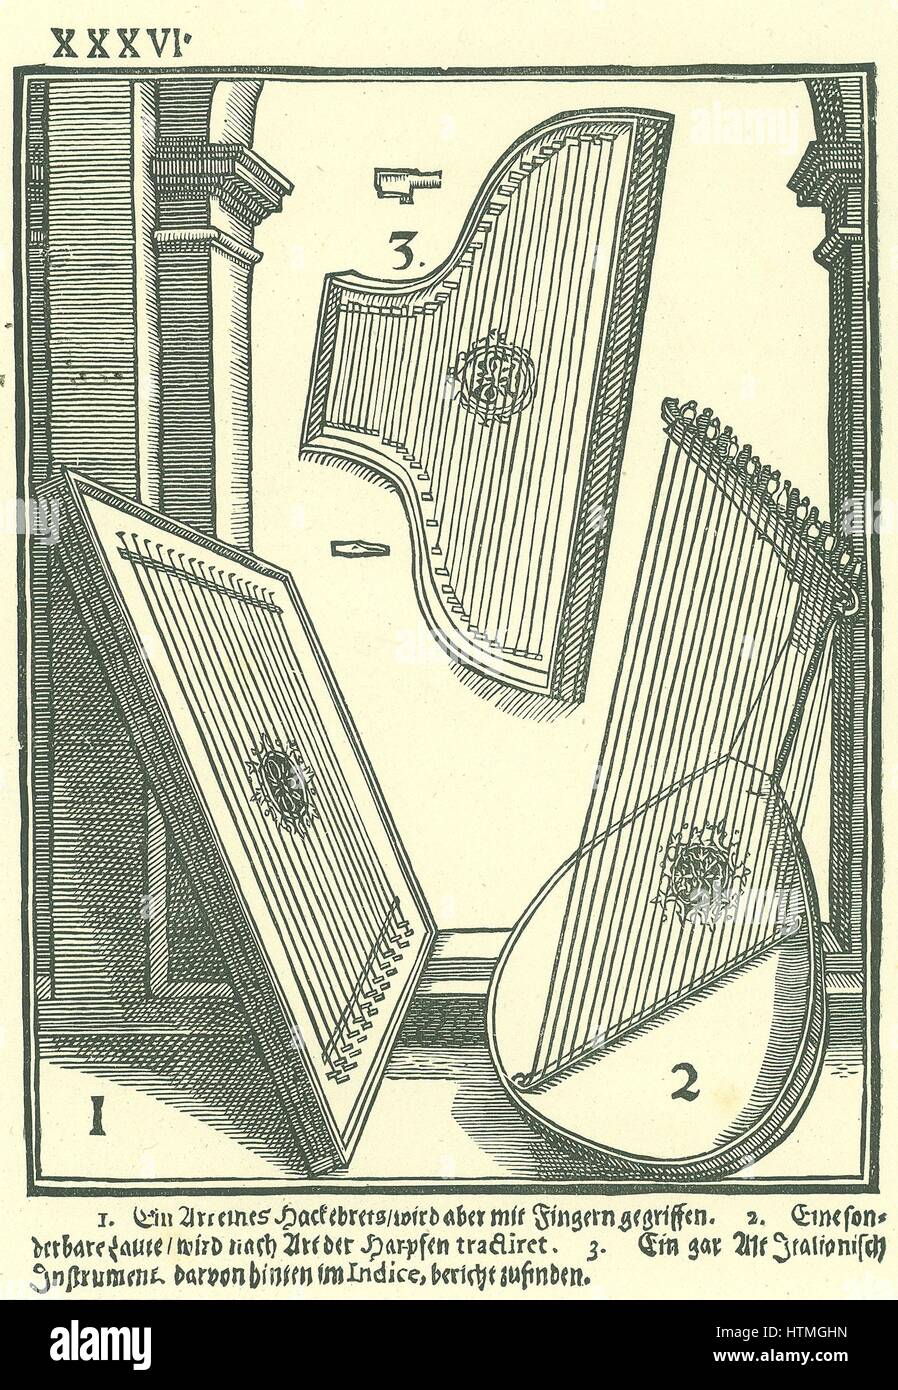 Early Italian stringed instruments. 1: A kind of Hackbret, 2: Lute-shaped instrument strung to be played like a harp, 3: Old Italian instrument played by plucking. Woodcut from Michael Praetorius 'Syntagma Musicum', 1615-1620. Stock Photo